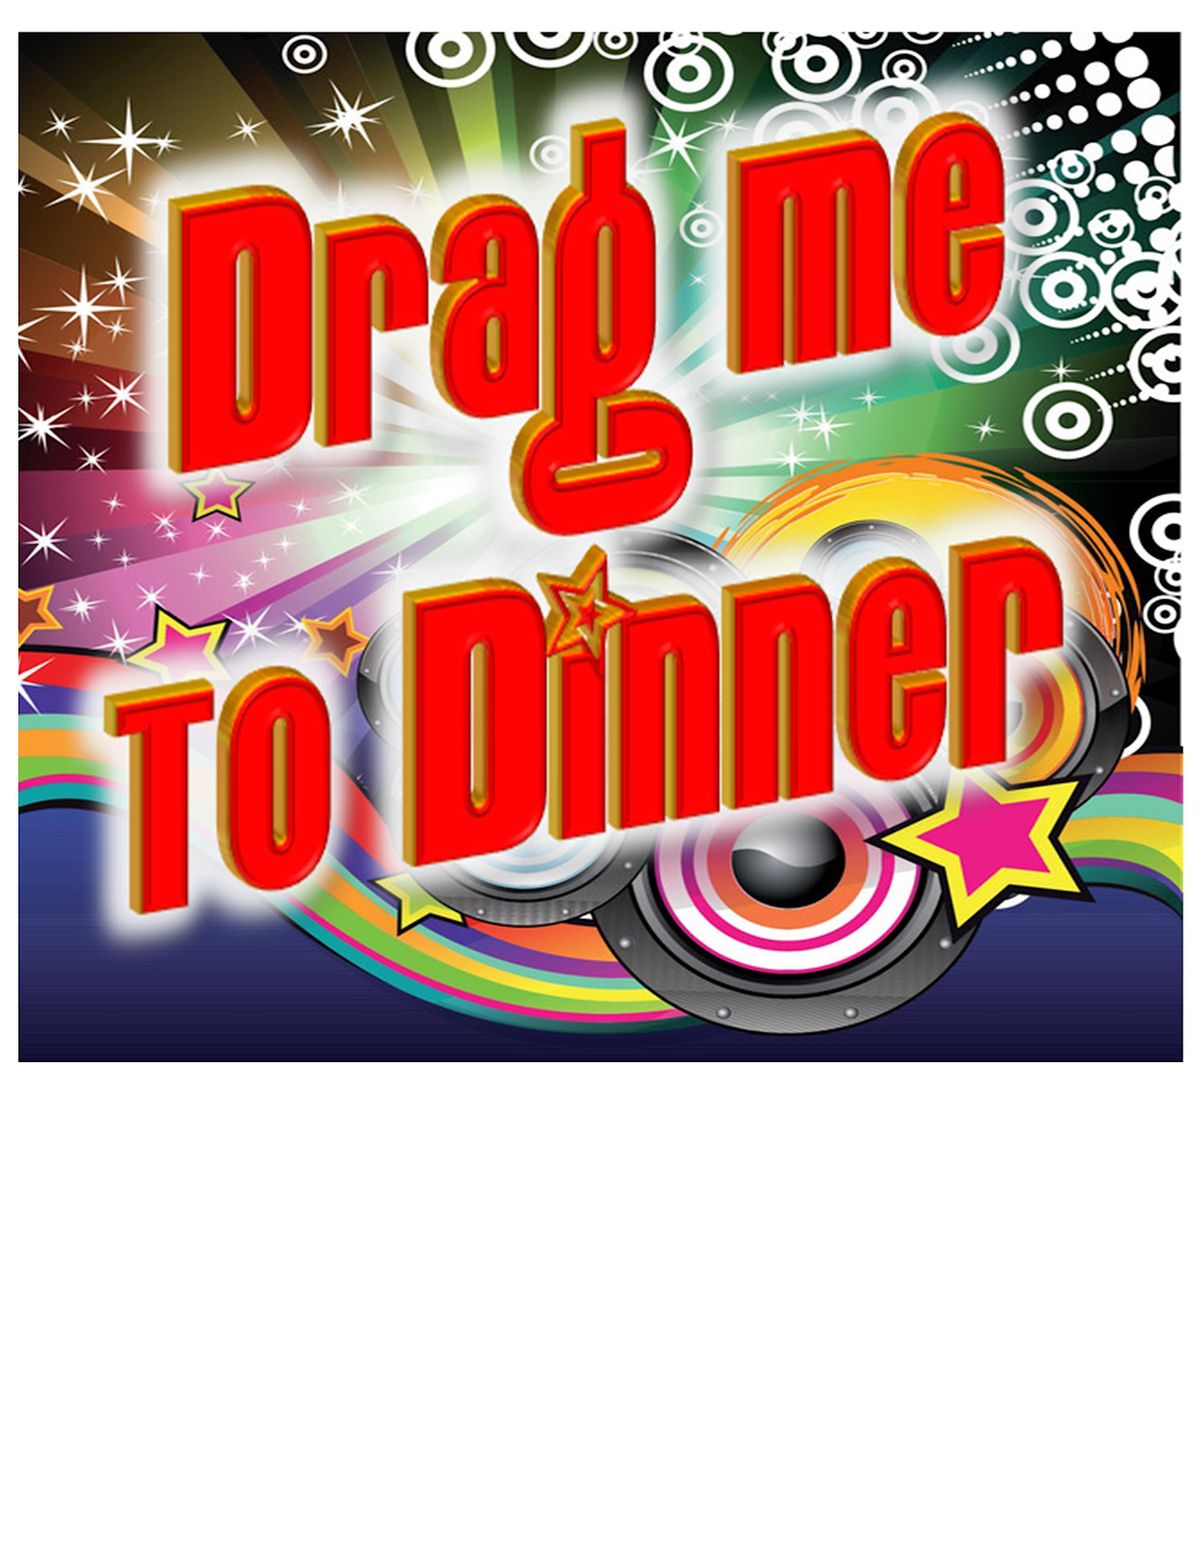 Copy of Drag me to Dinner